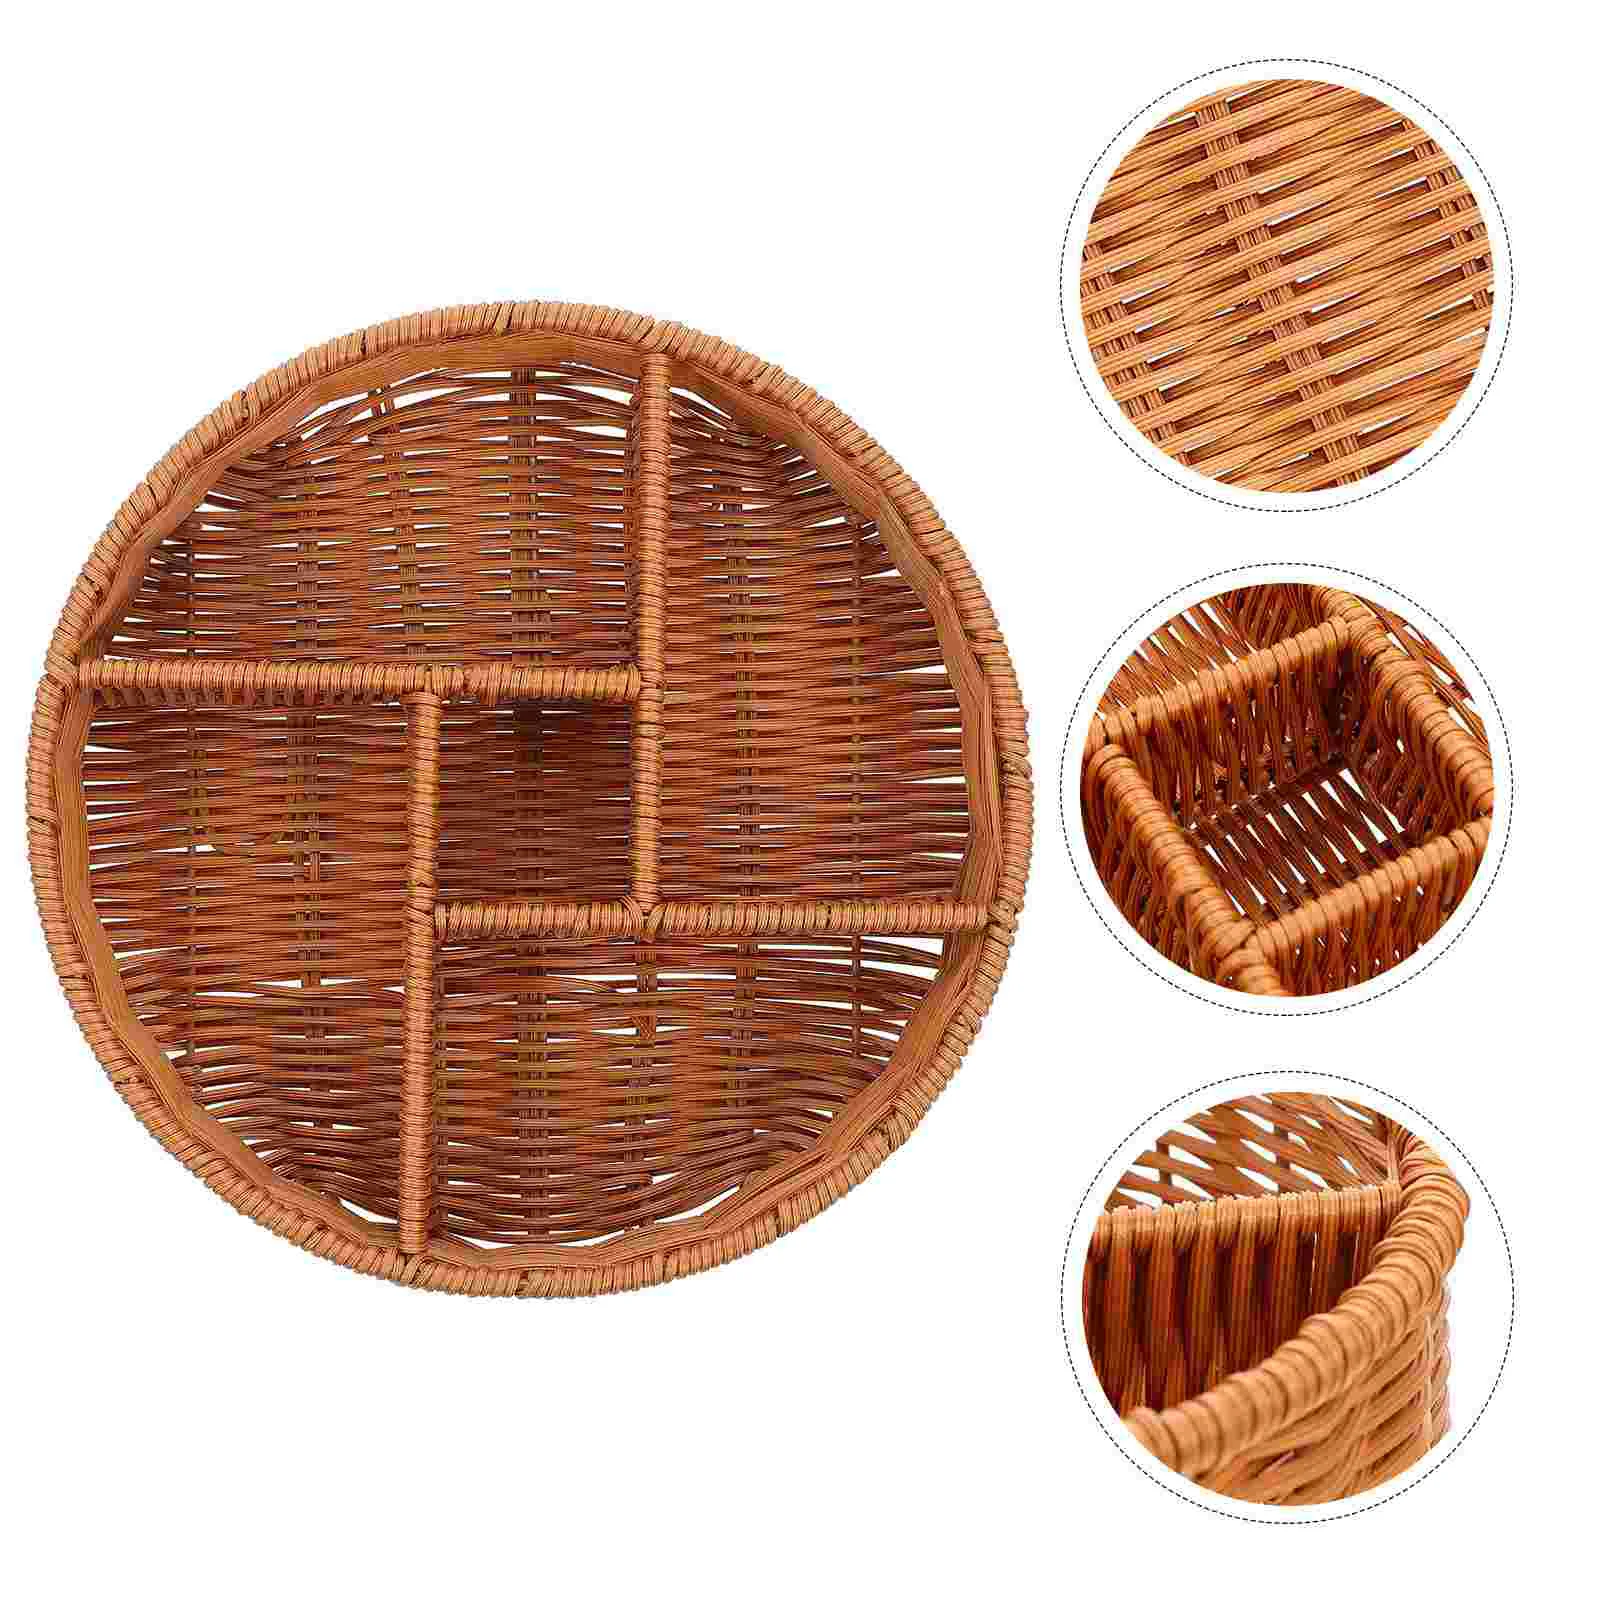 

Tray Basket Serving Rattan Storage Woven Wicker Fruit Holder Snack Bread Baskets Platter Table Plate Divided Coffee Display